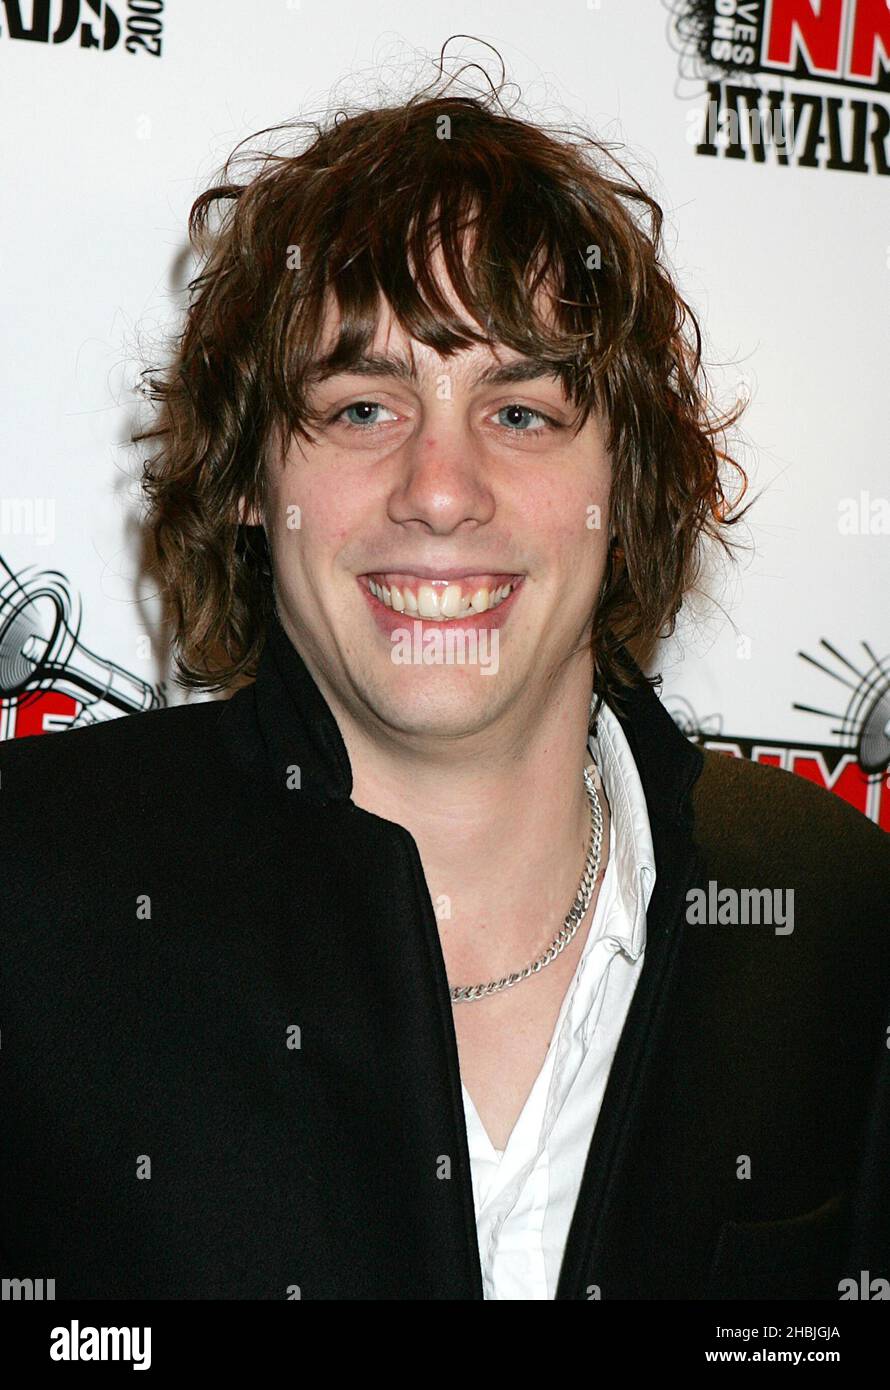 Razorlight pose at arrivals at The Shockwaves NME Awards 2005 at Hammersmith Palais on February 17, 2005 in London. Stock Photo